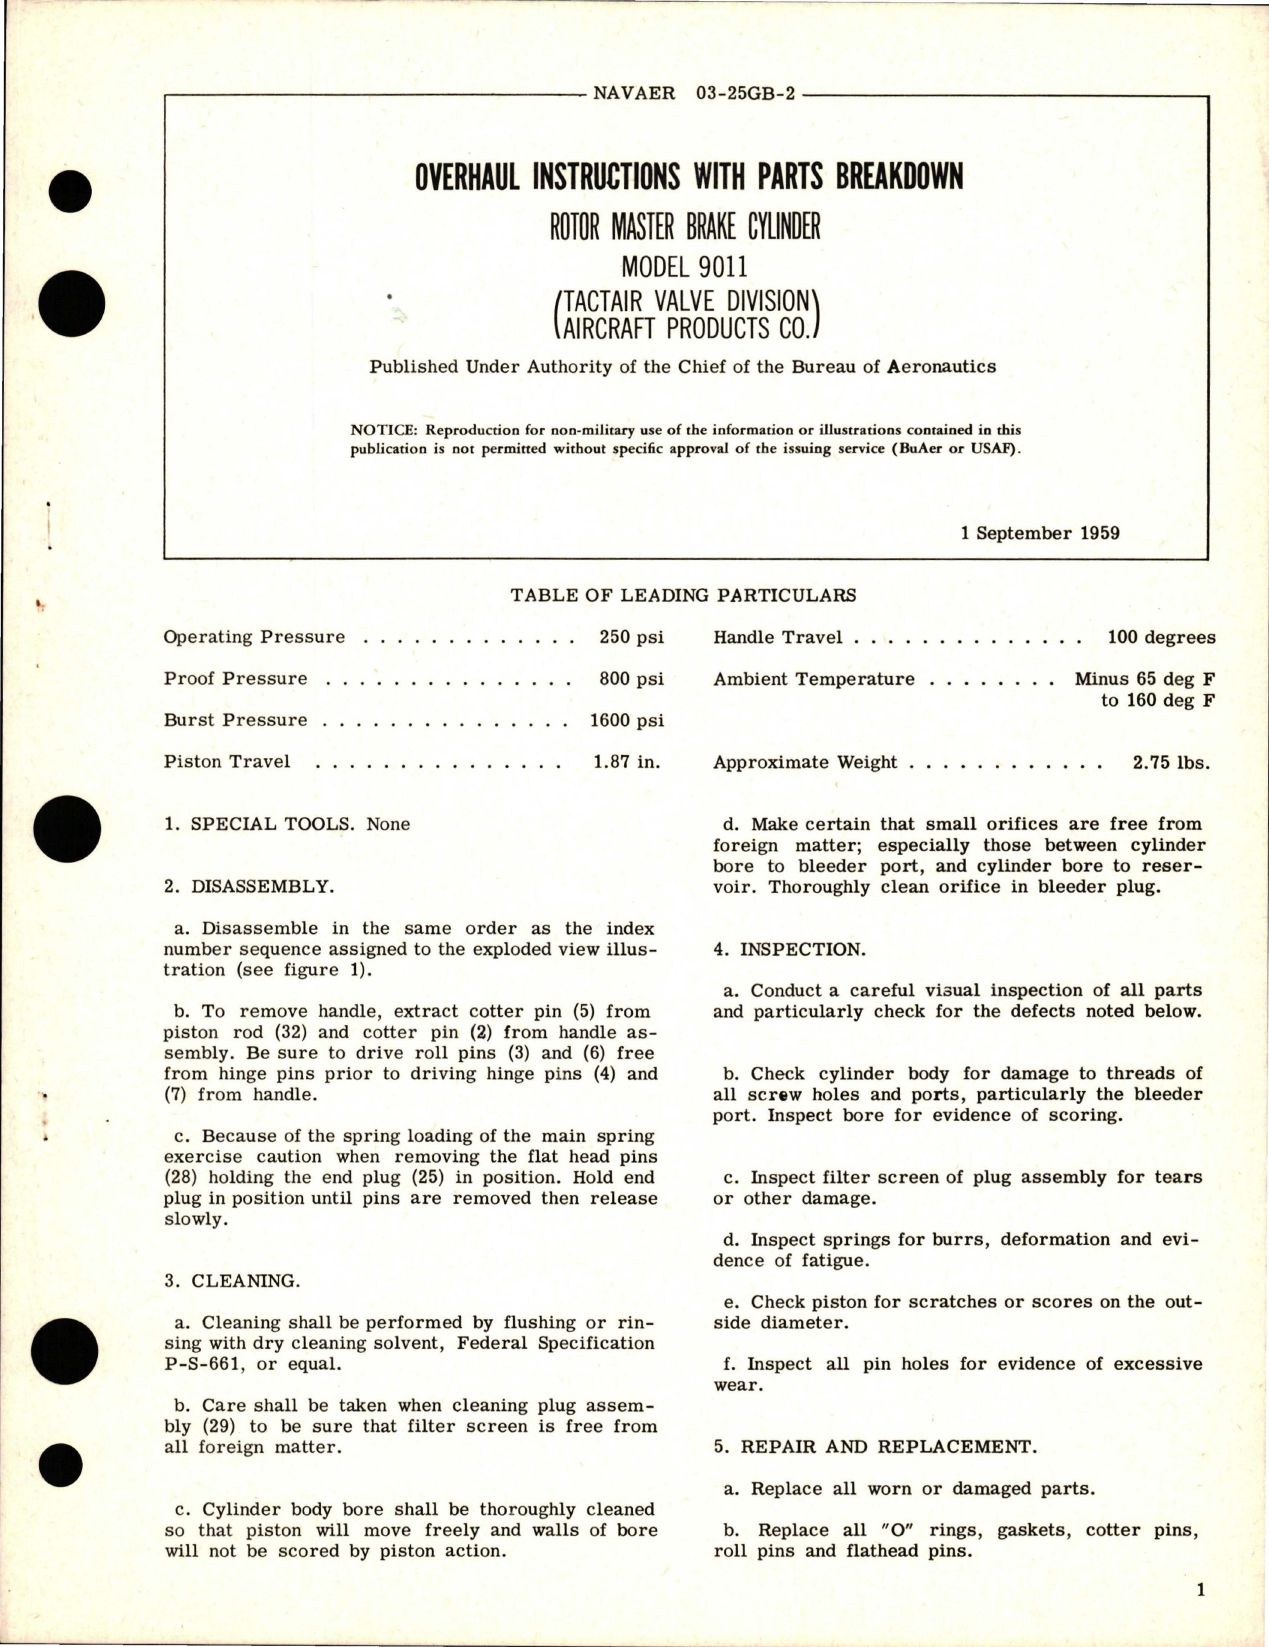 Sample page 1 from AirCorps Library document: Overhaul Instructions wIth Parts Breakdown for Rotor Master Brake Cylinder - Model 9011